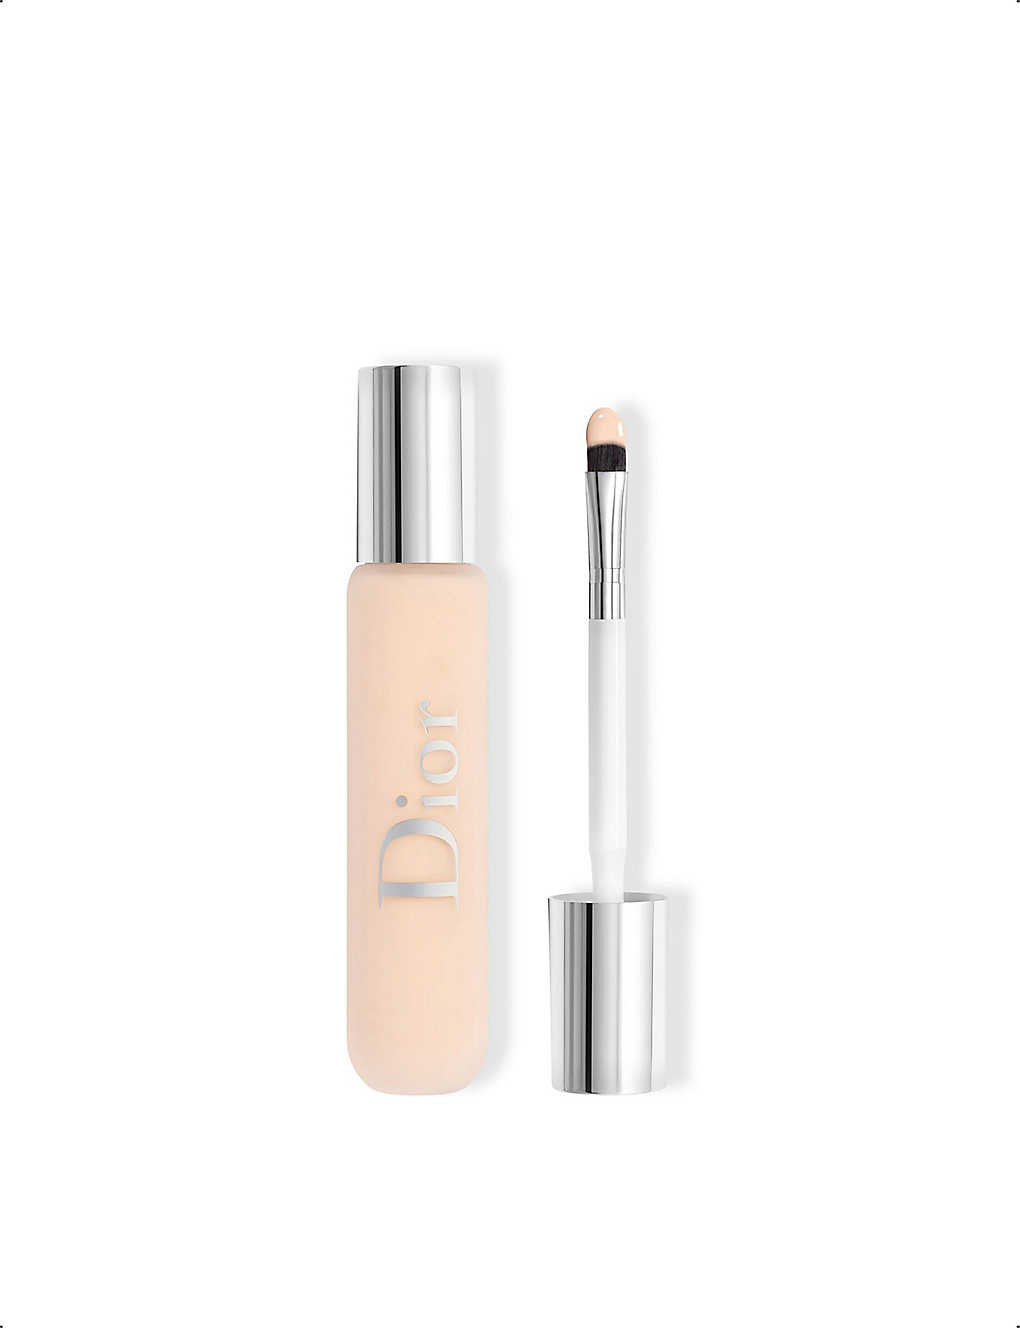 Dior Backstage Face & Body Flash Perfector Concealer 11ml In 2cr